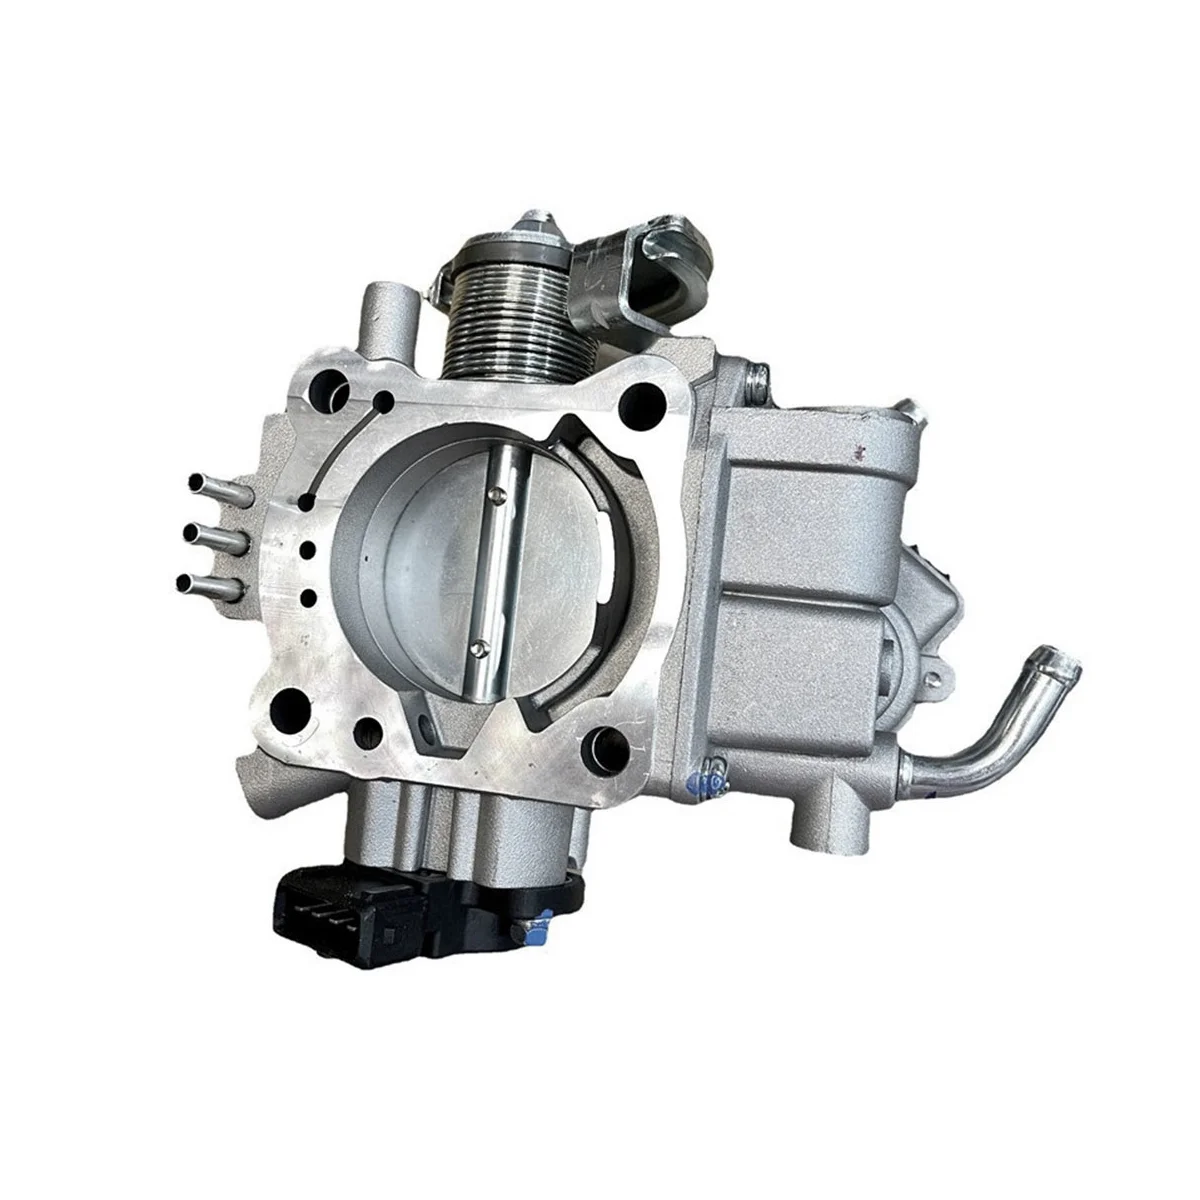 Auto Throttle Body embly for  Galant 2.0L 2WD Engine Code 4G64 4G63 MR579011 MD3 - £361.76 GBP